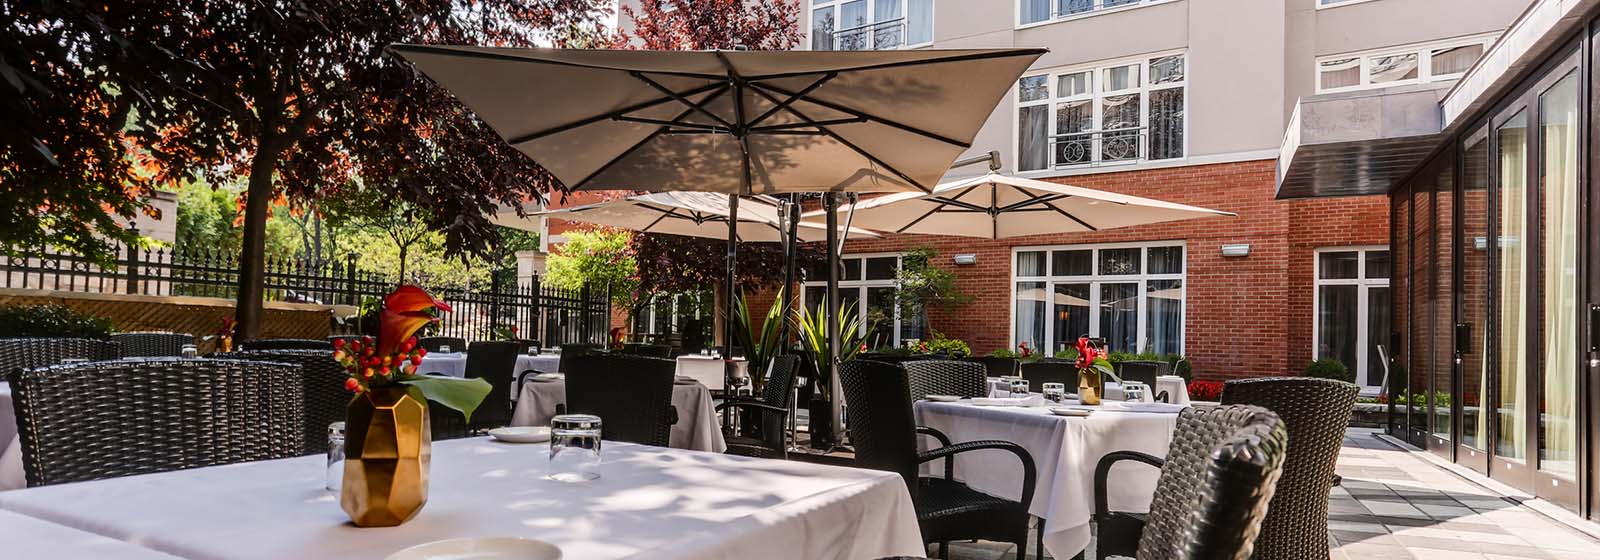 Enjoy a tasty experience at Oskar restaurant and garden terrace located in the saint-sulpice hotel montreal